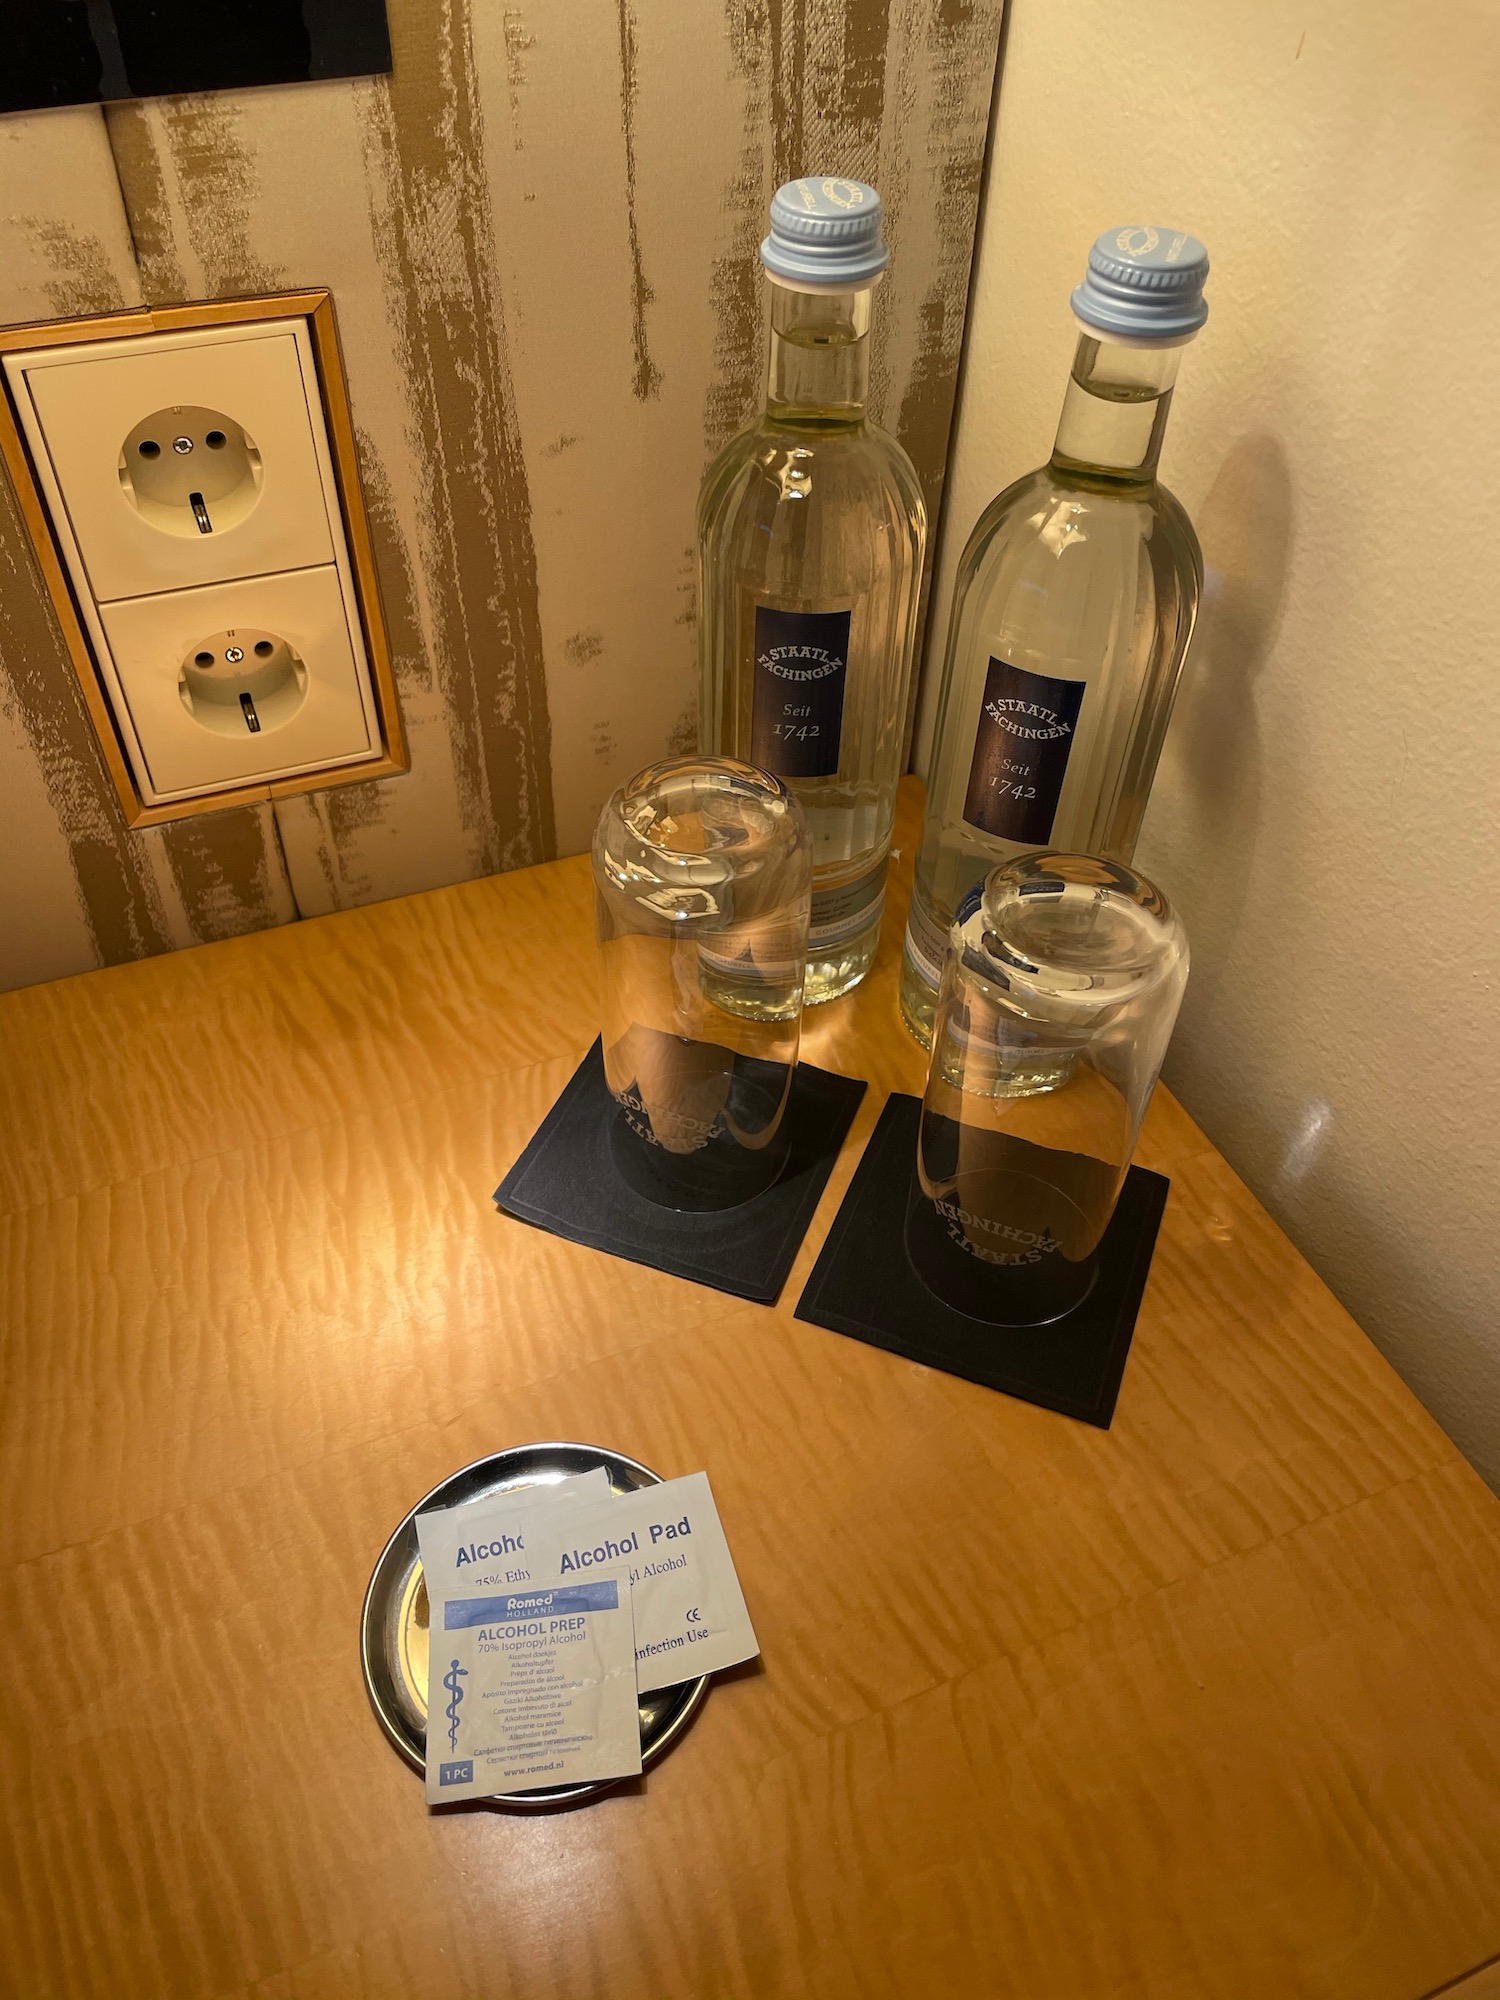 a group of bottles and glasses on a table